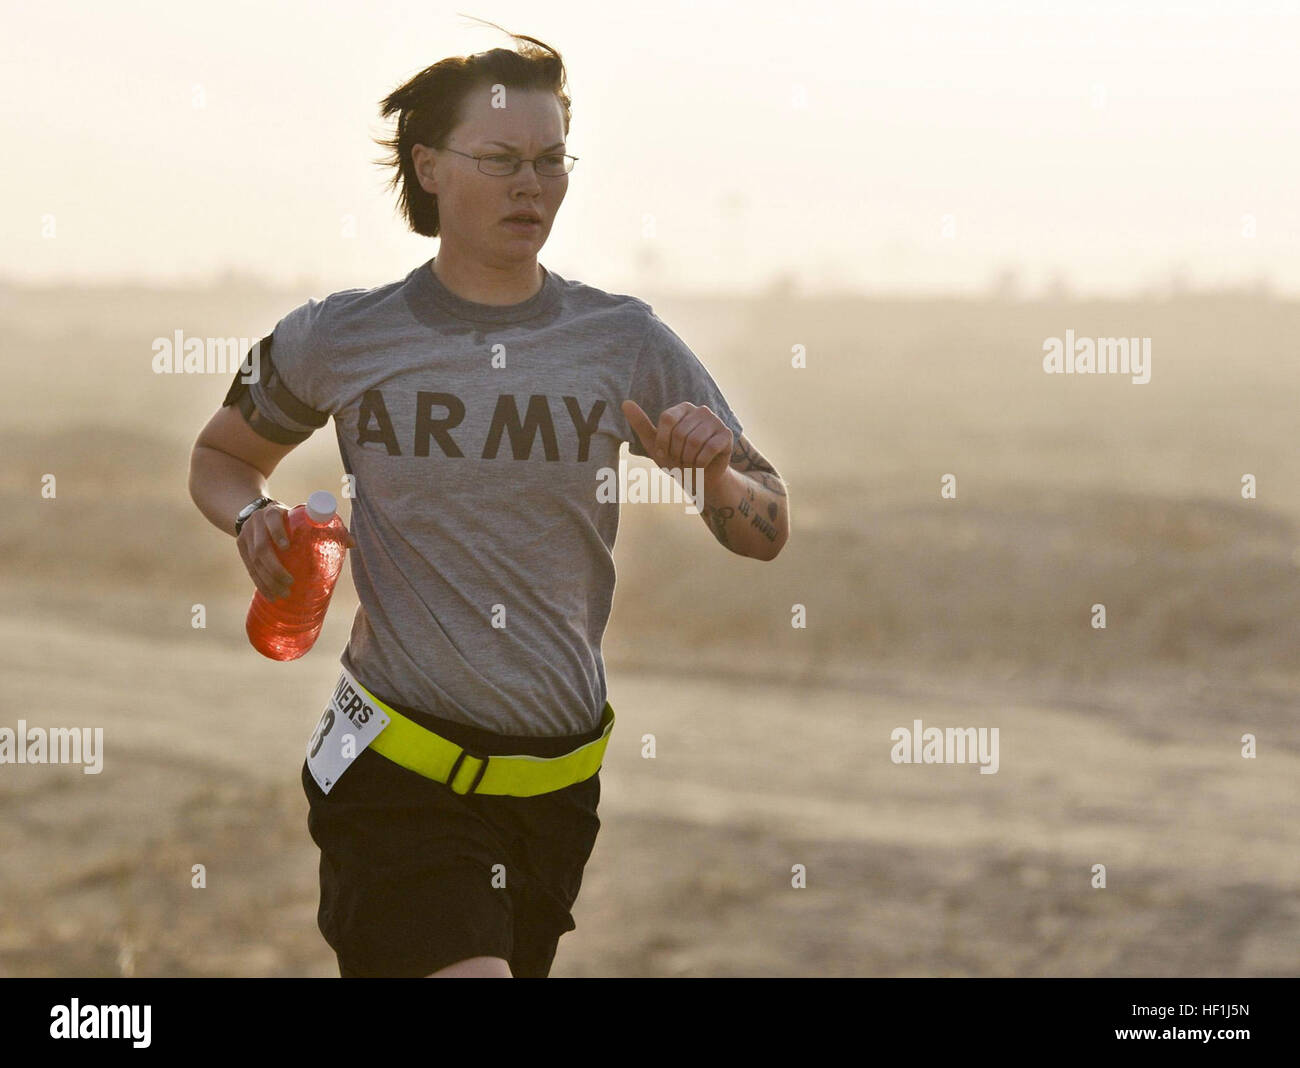 U.S. Army Cpl. Bevin Cook, 272nd Military Police Company, U.S. Division-North, runs the Task Force 26.2 Half Marathon at Contingency Operating Base Speicher, Iraq, April 17. Cook, from Royal Oak, Mich., took first place for the female division. Flickr - DVIDSHUB - Half, full marathon cap off Task Force 26.2 run series (Image 7 of 7) Stock Photo